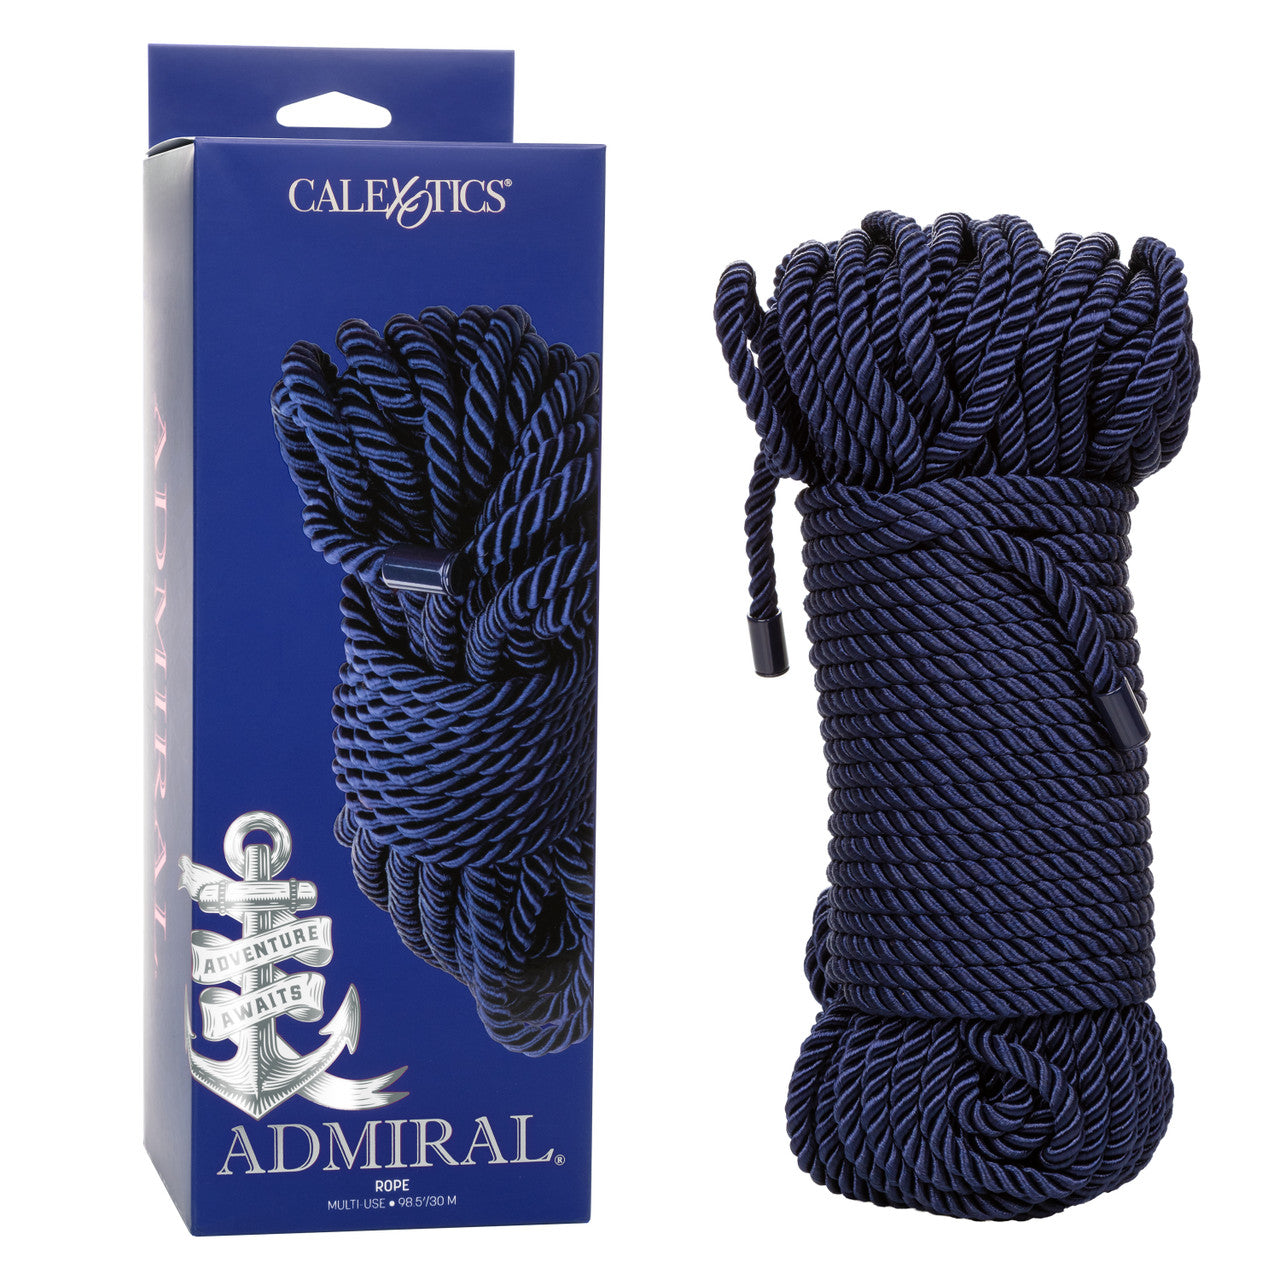 Admiral® Rope 98.5’/30 M